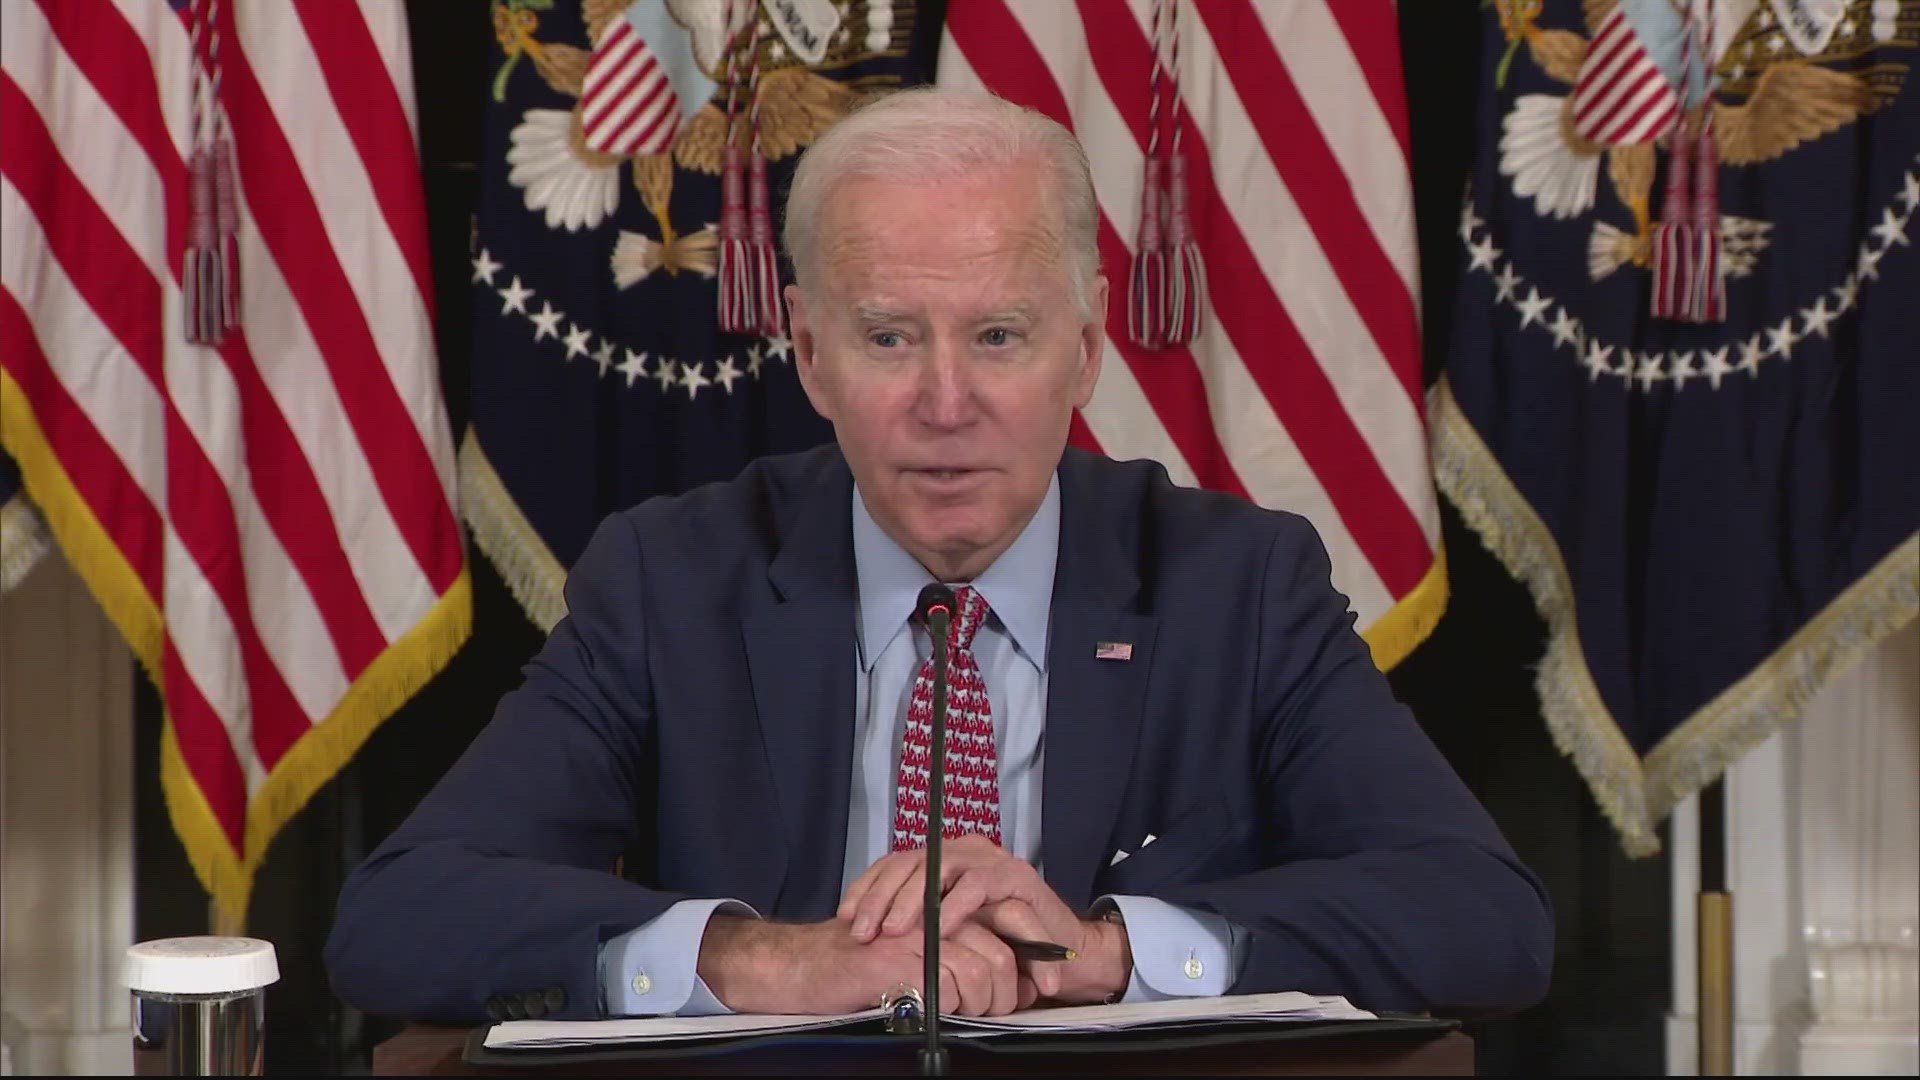 President Joe Biden signed legislation Monday that ended the national emergency. The end comes more than three years after it was declared by then-President Trump.